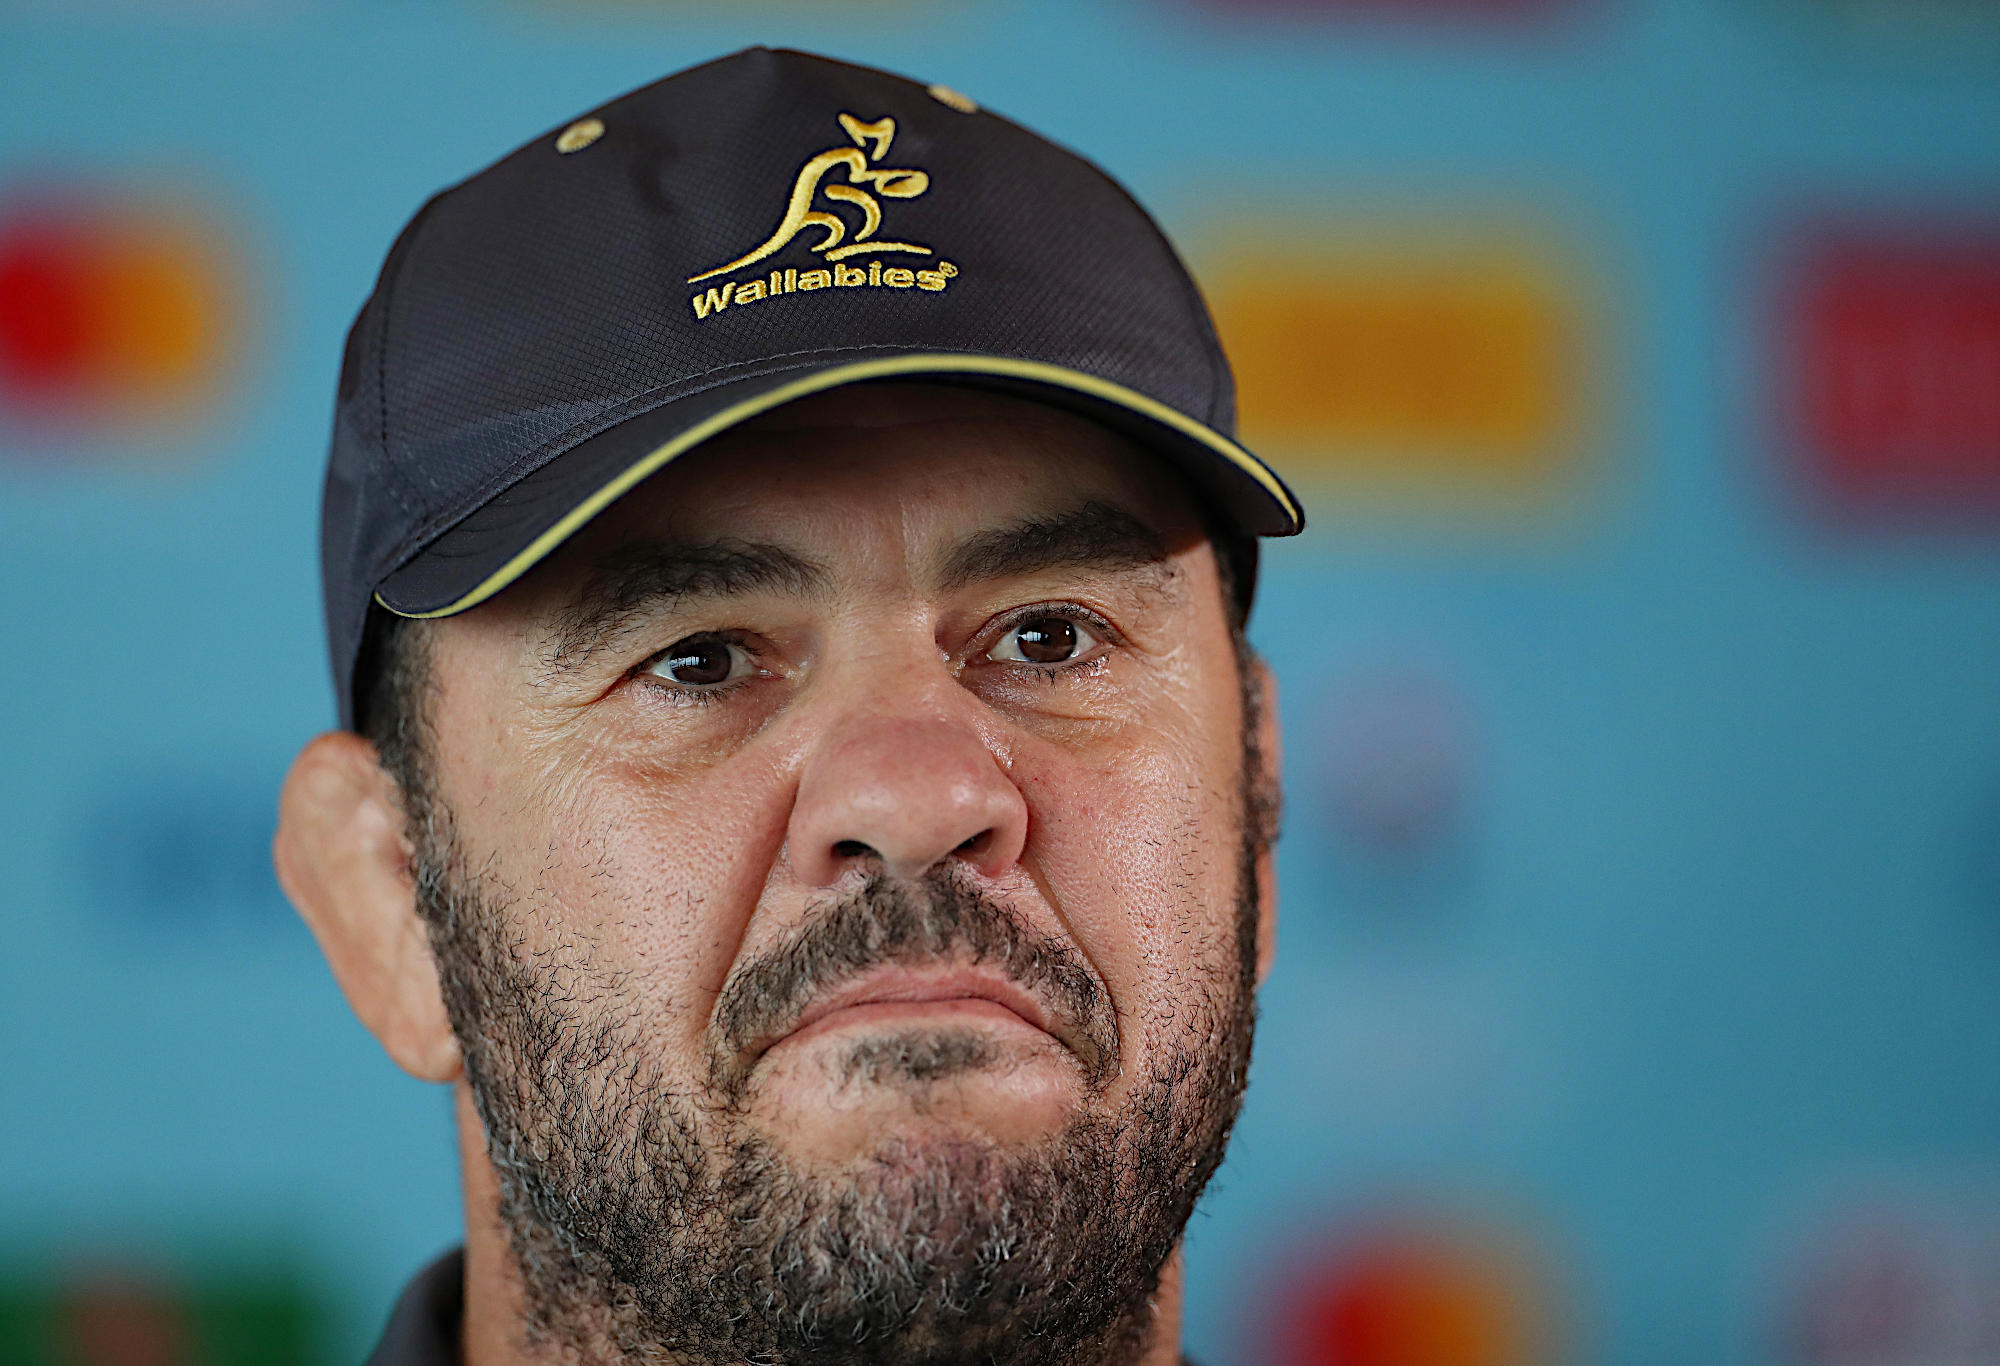 With a massive selection gamble, Michael Cheika rearranges the deck chairs once again